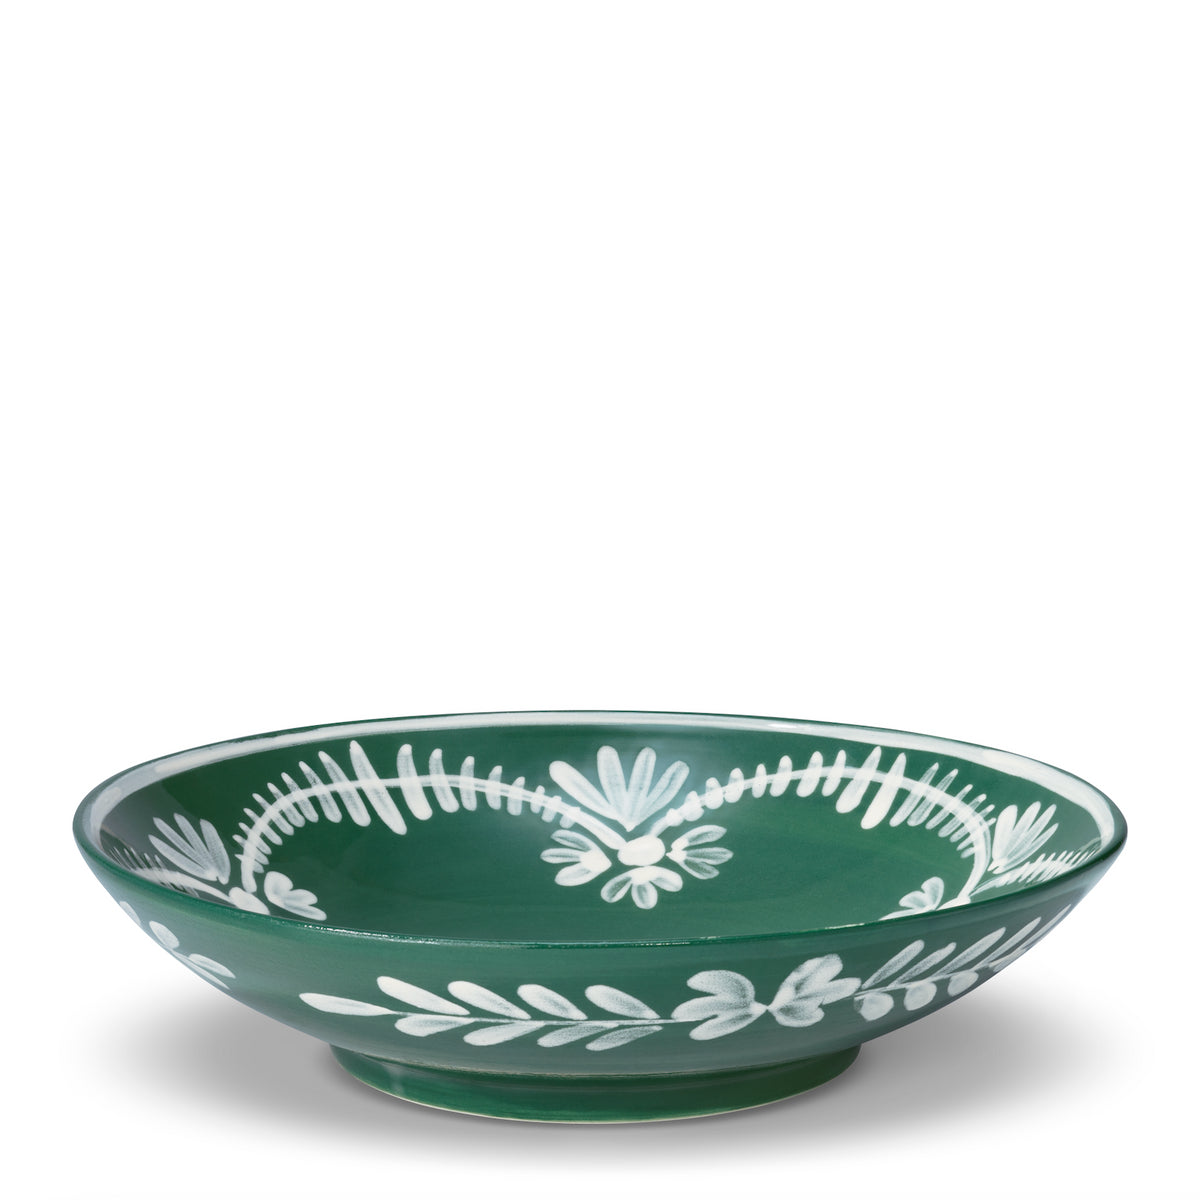 Serving Bowl With White Floral Trim in Cypress